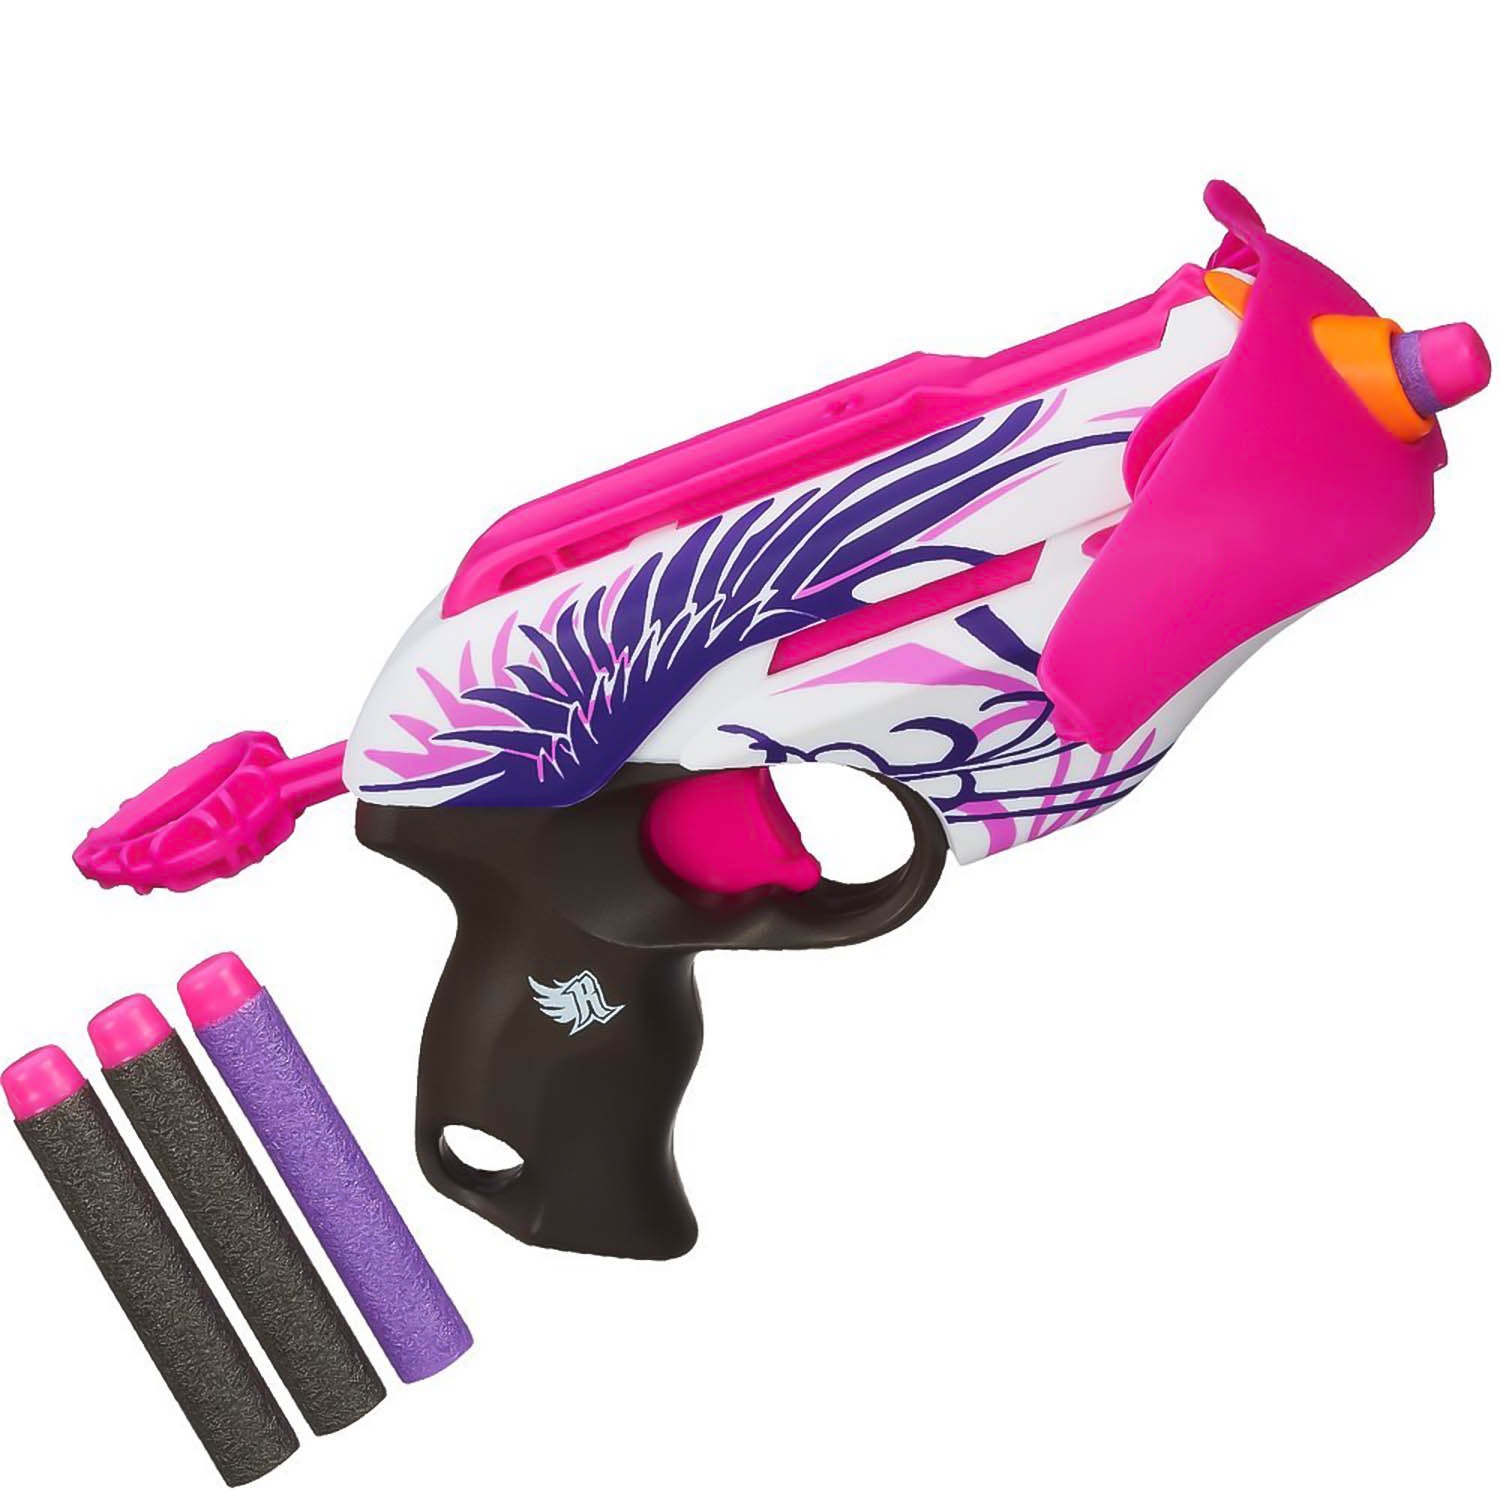 NERF Rebelle Pink Crush Blaster Crossbow Fires Darts up to 75 Feet 2in1 for sale online 